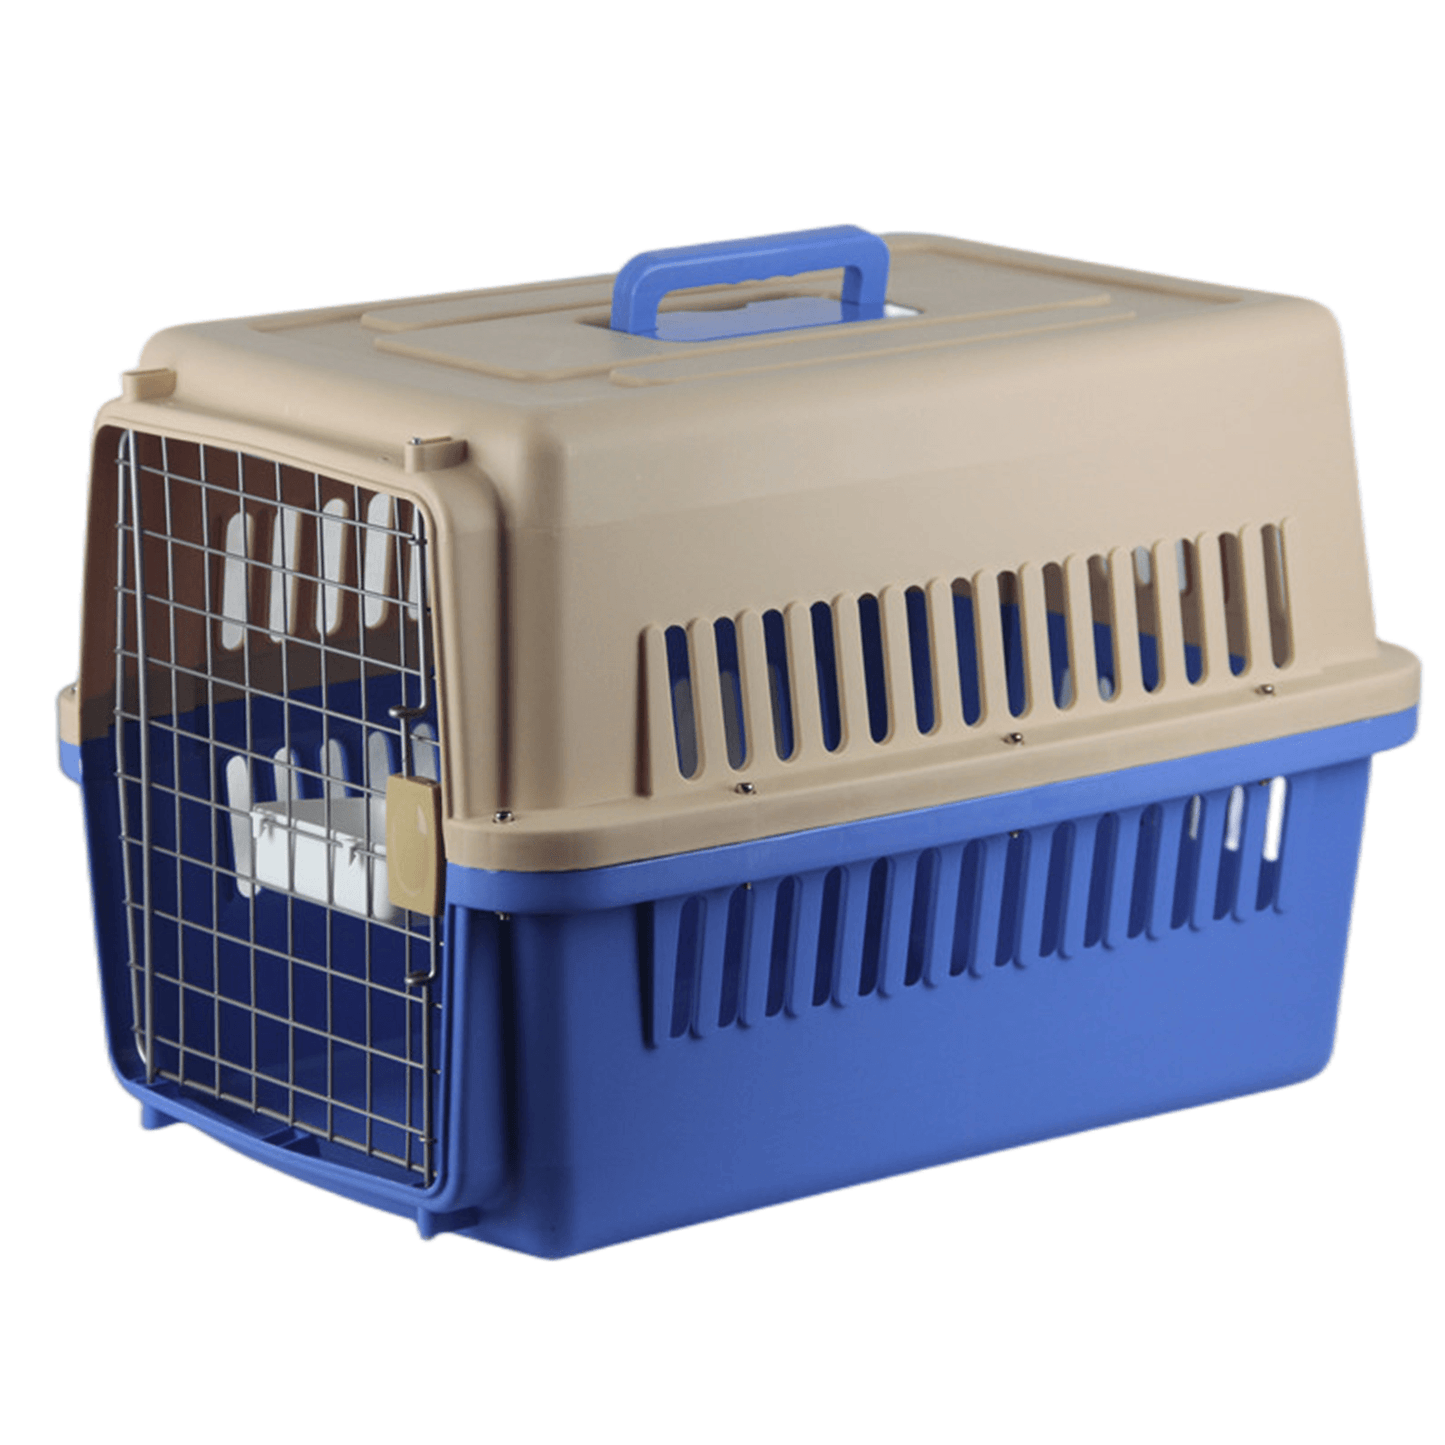 YES4PETS New Medium Dog Cat Rabbit Crate Pet Carrier Cage With Bowl & Tray Blue